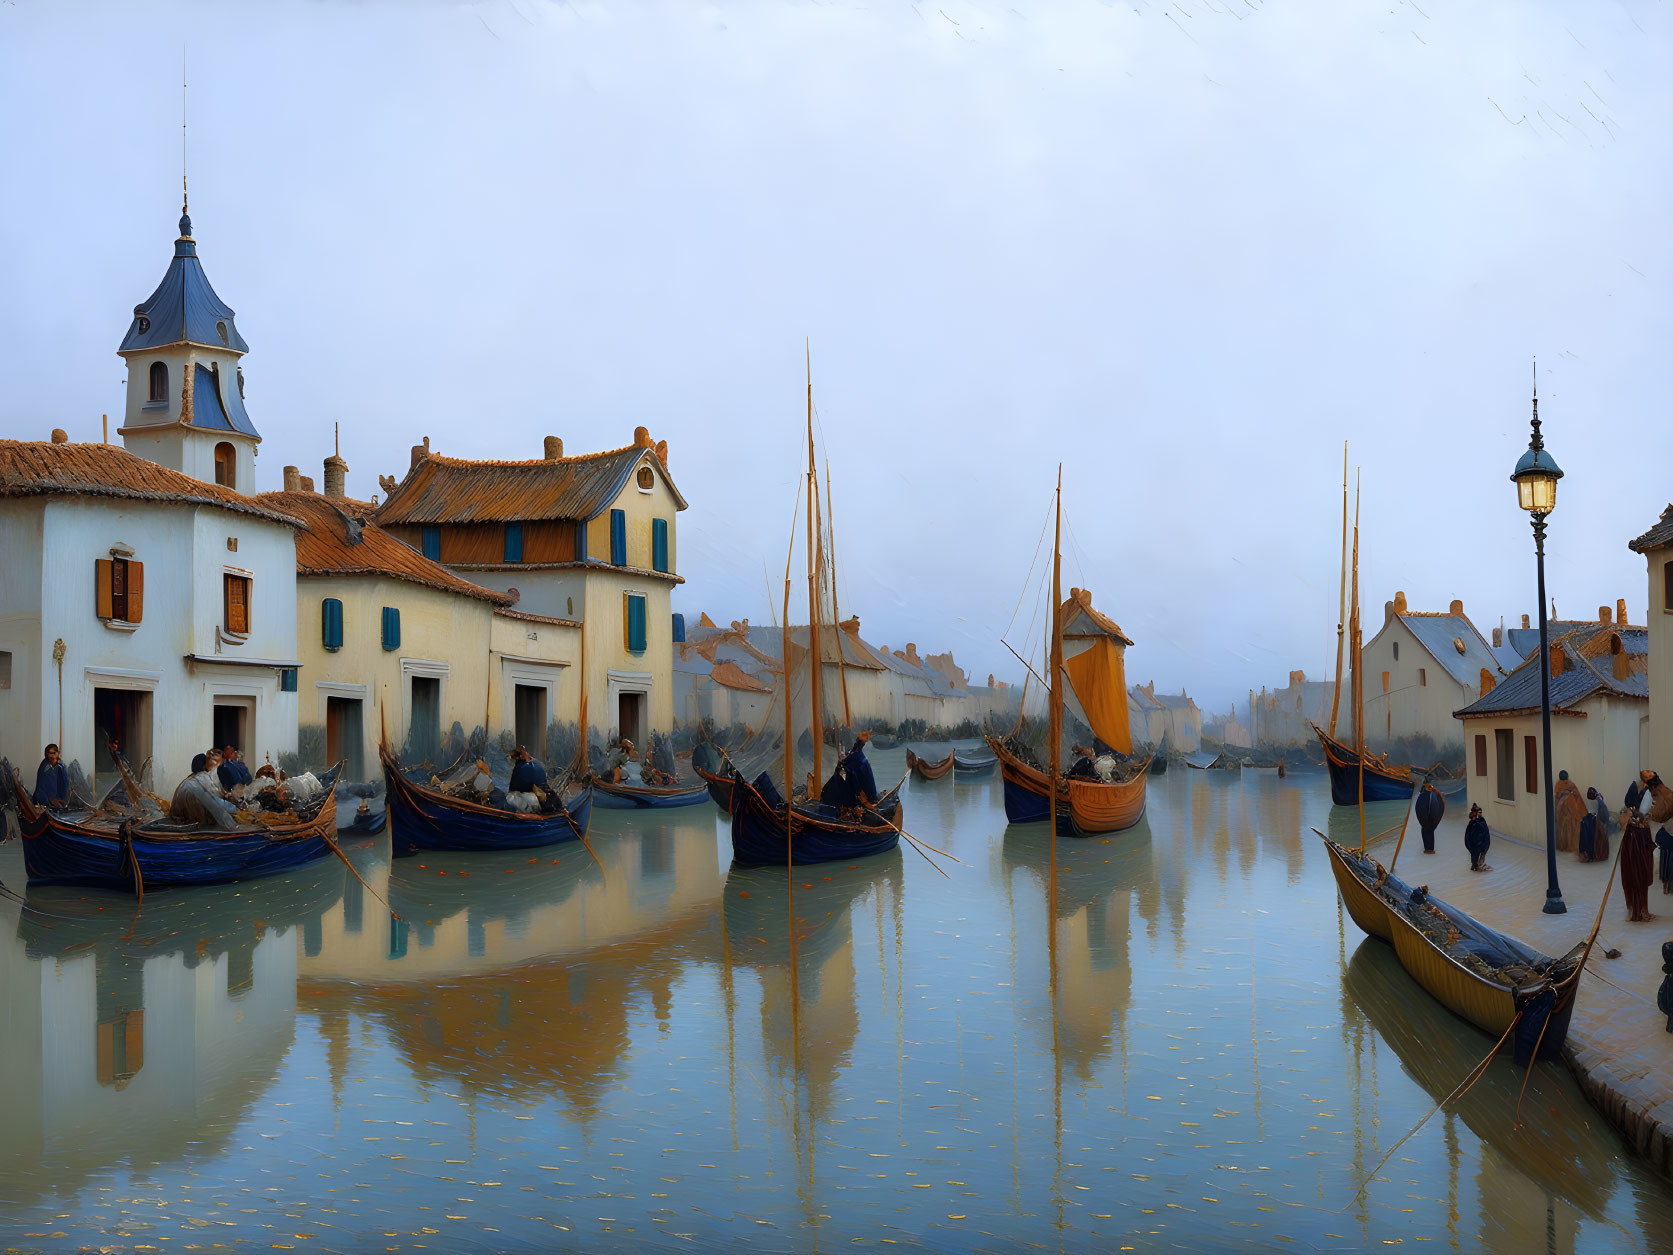 European Harbor Village with Impressionist Style Architecture and Boats